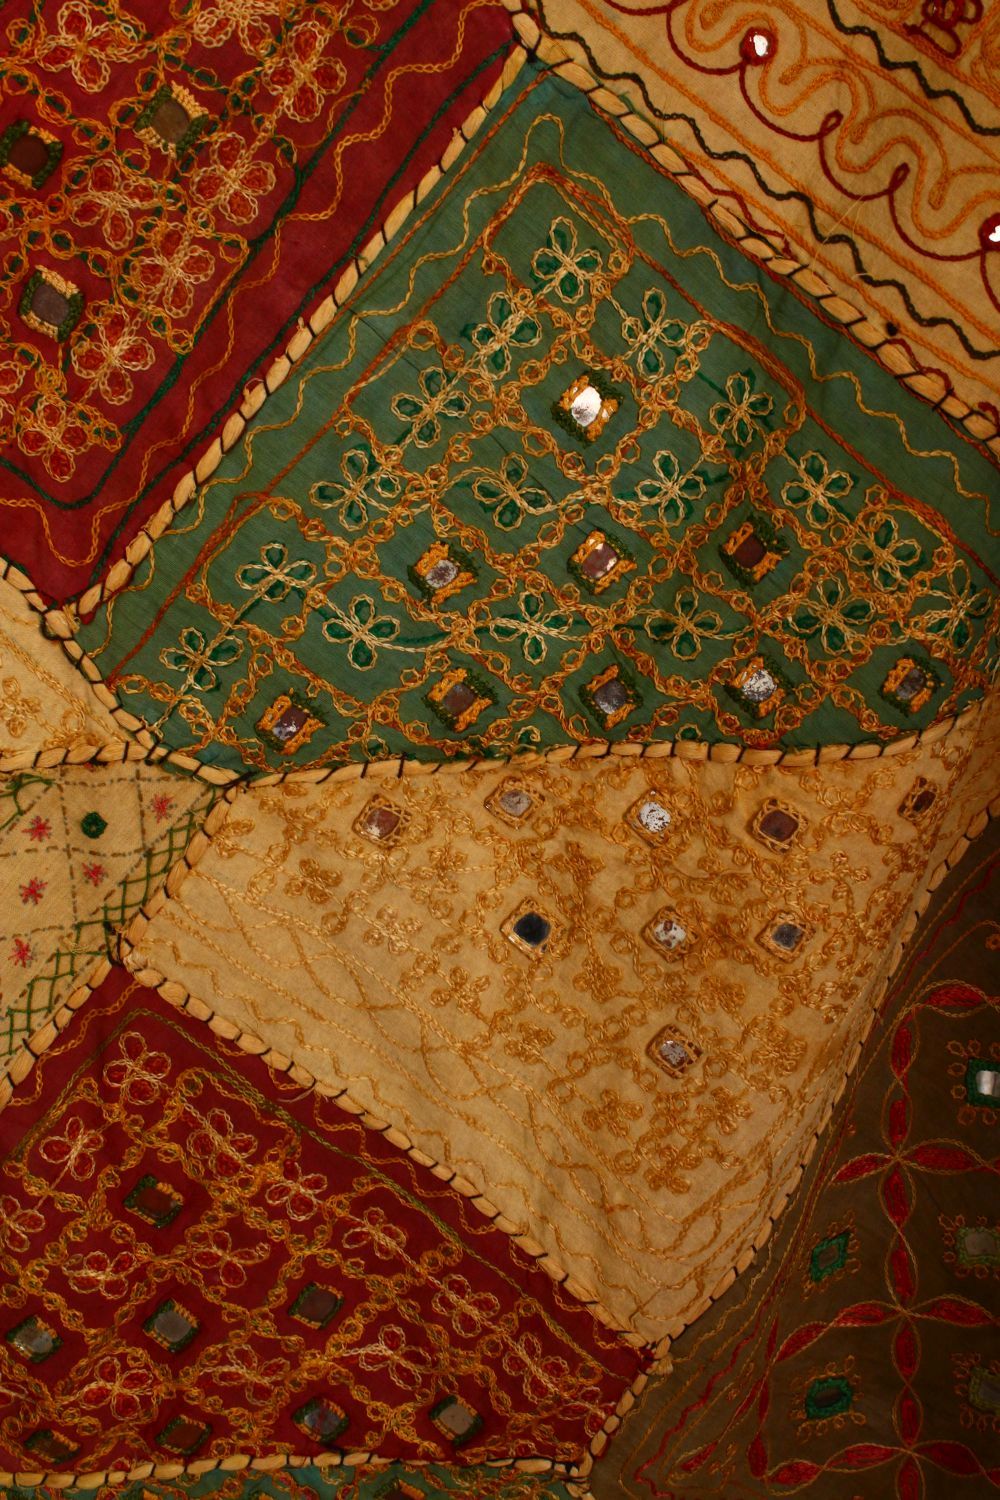 TWO ISLAMIC TEXTILES, both with stitched in mirrored sections, 150cm x 100cm and 100cm x 95cm. - Image 3 of 5